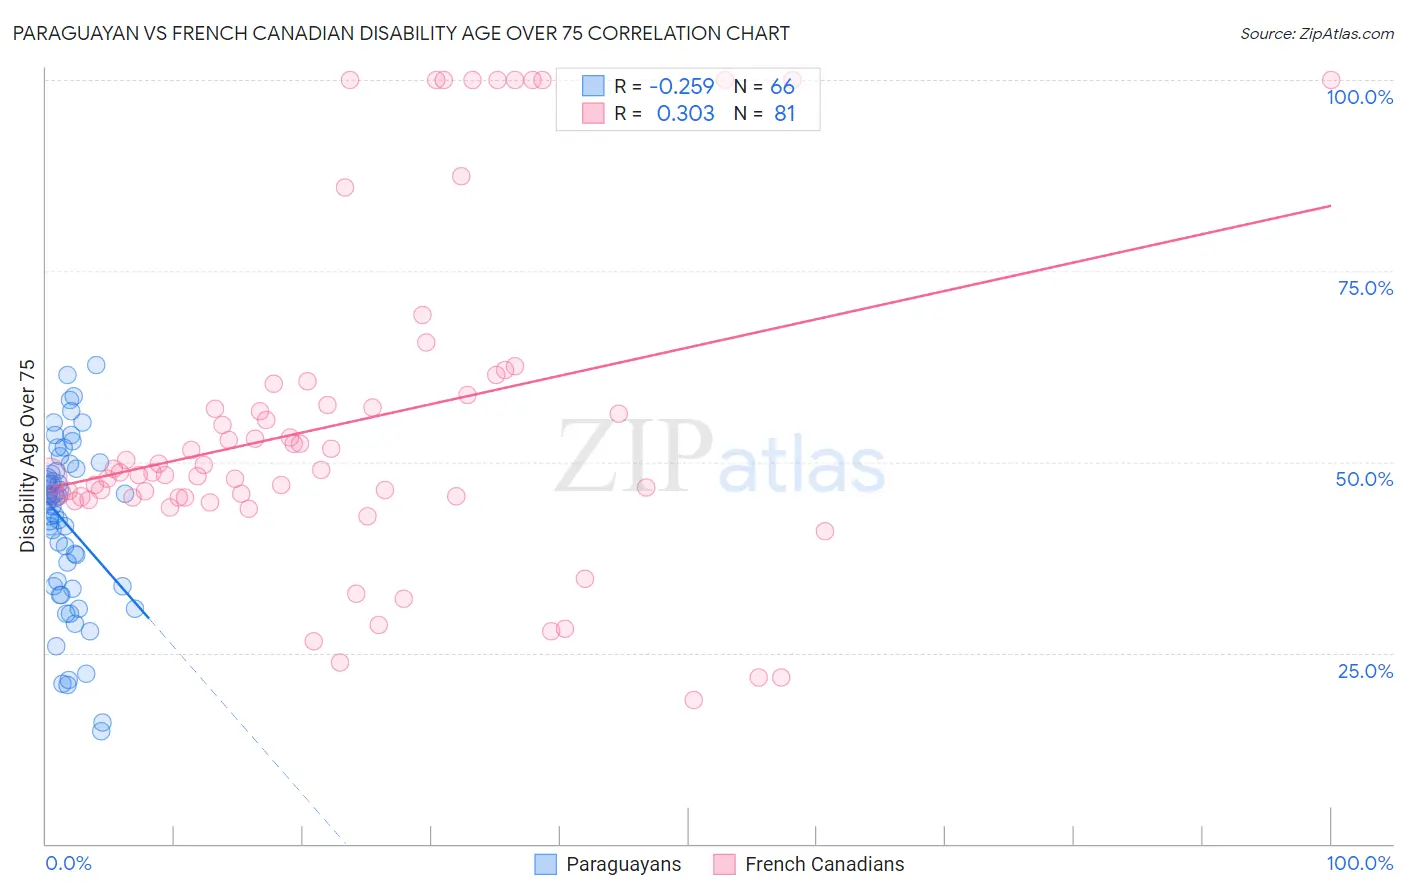 Paraguayan vs French Canadian Disability Age Over 75